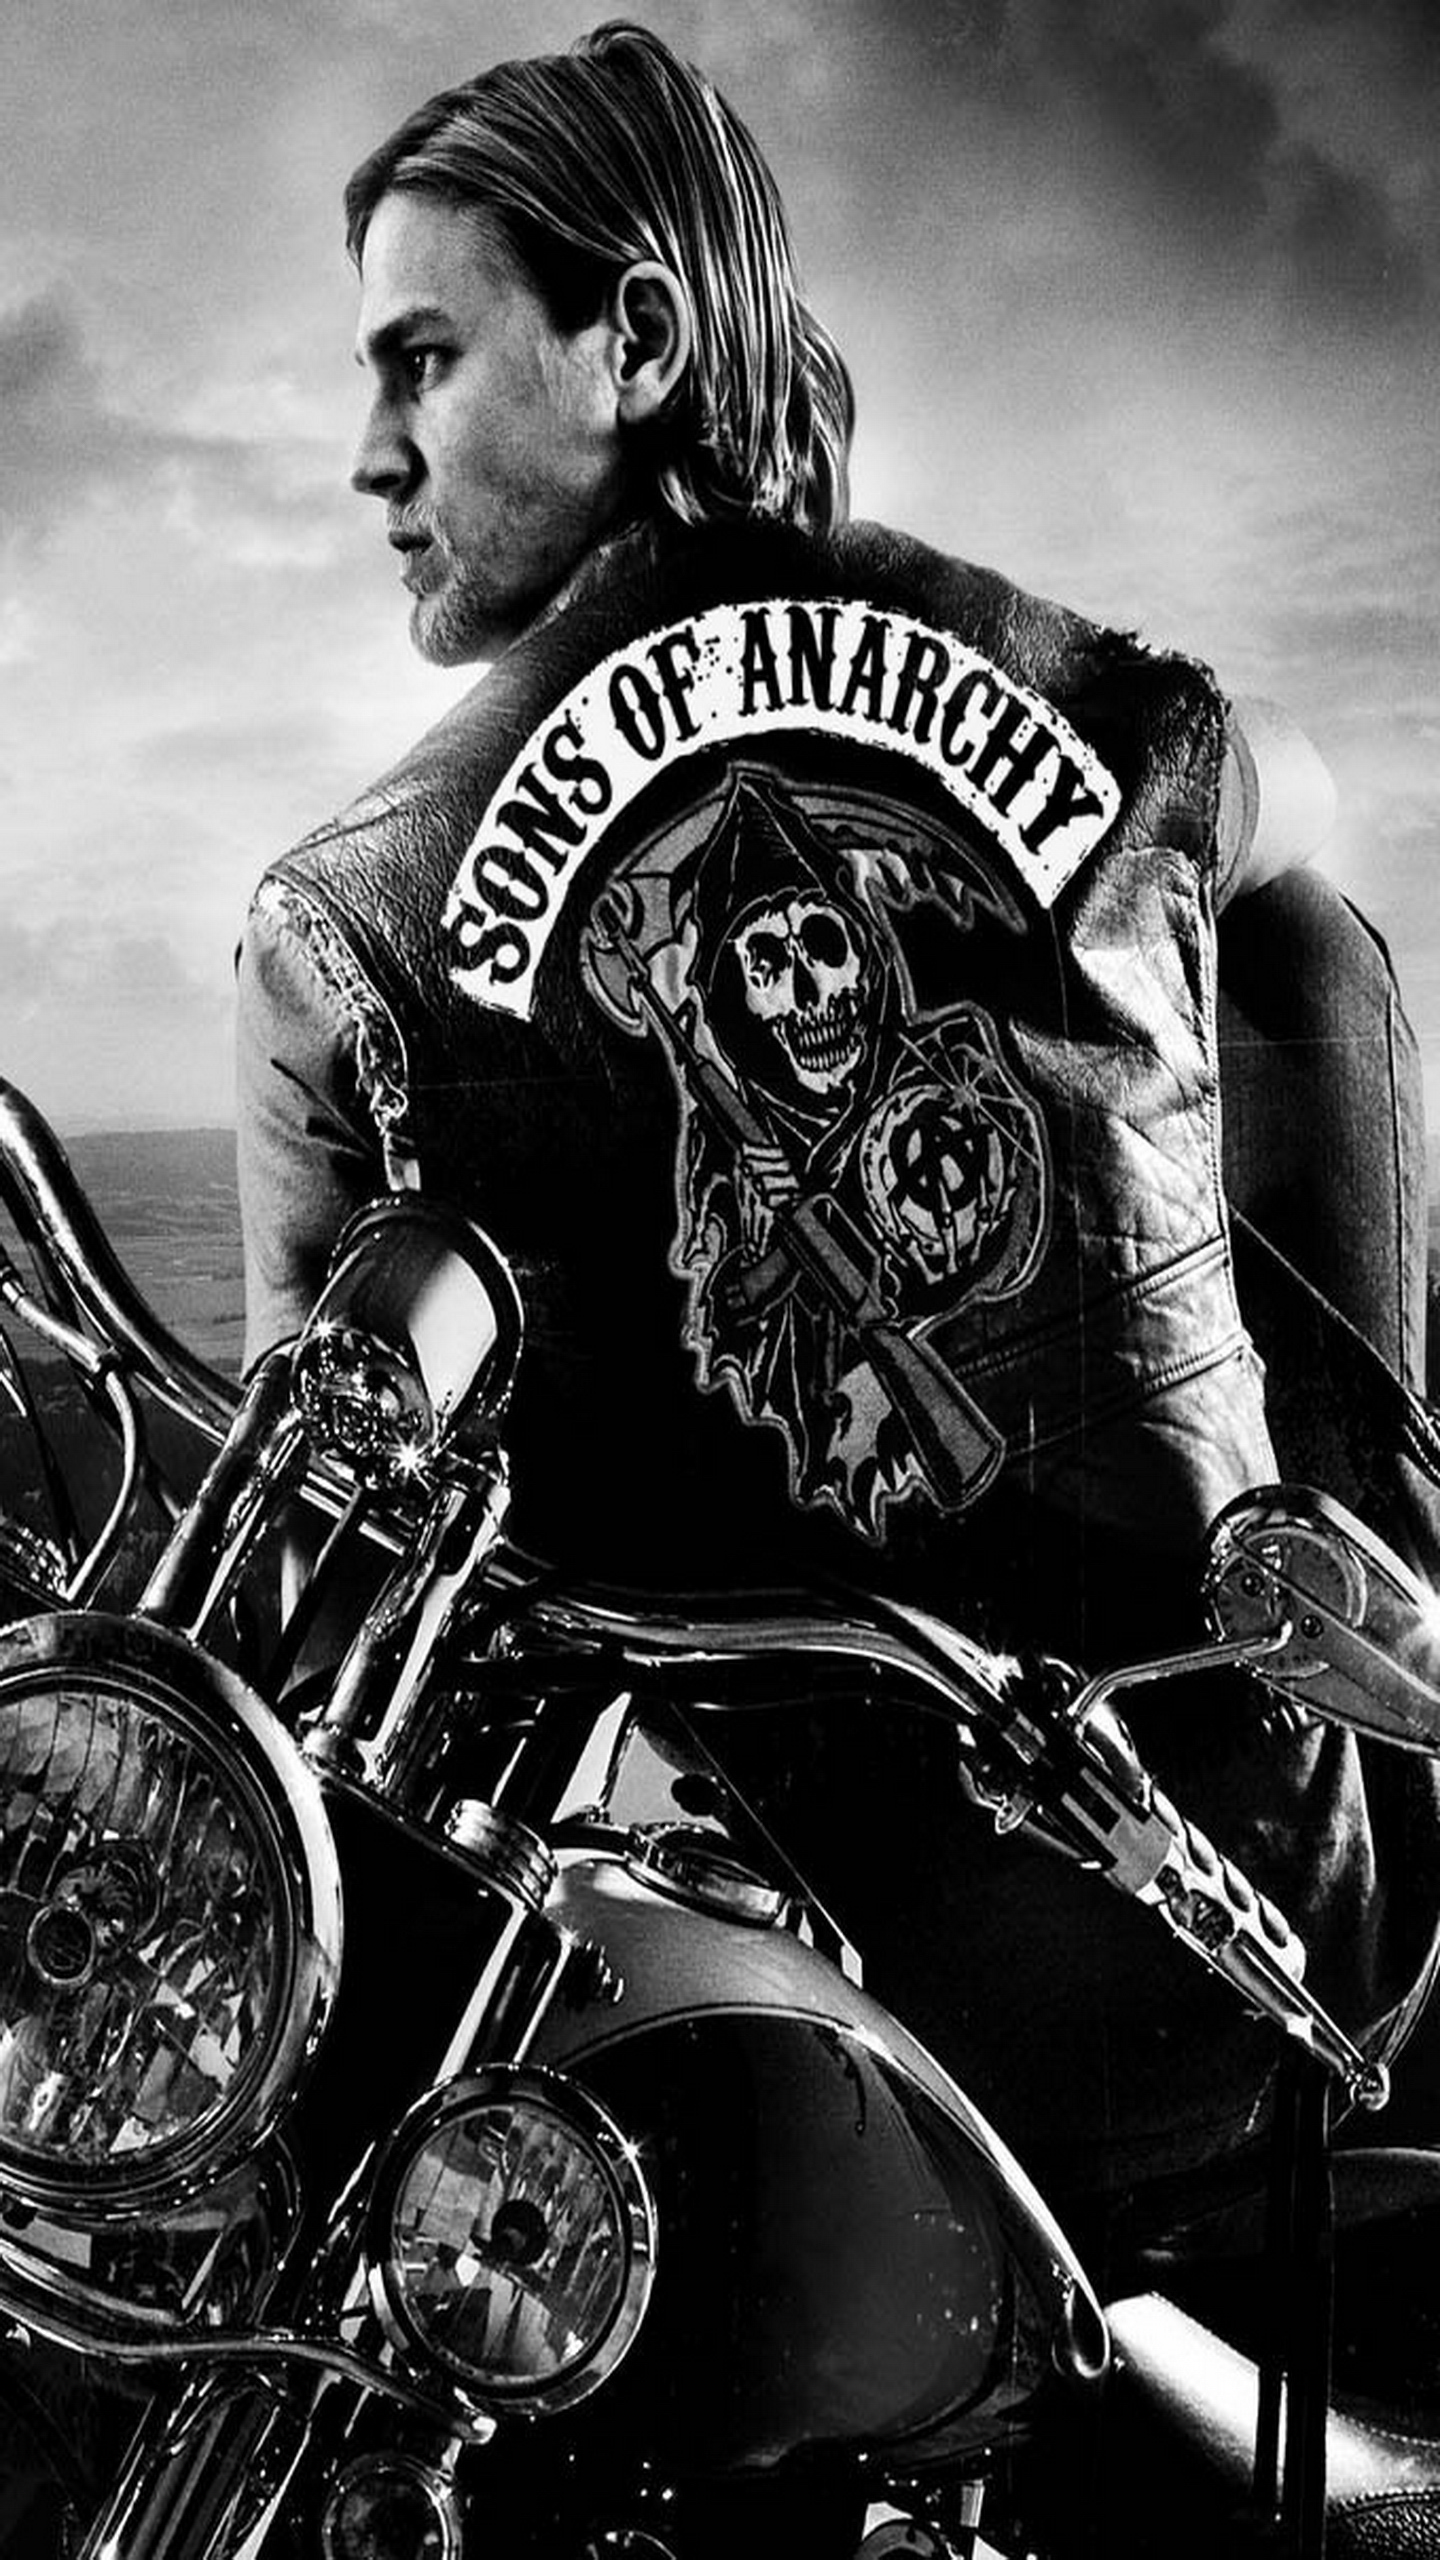 Wallpaper Sons Of Anarchy